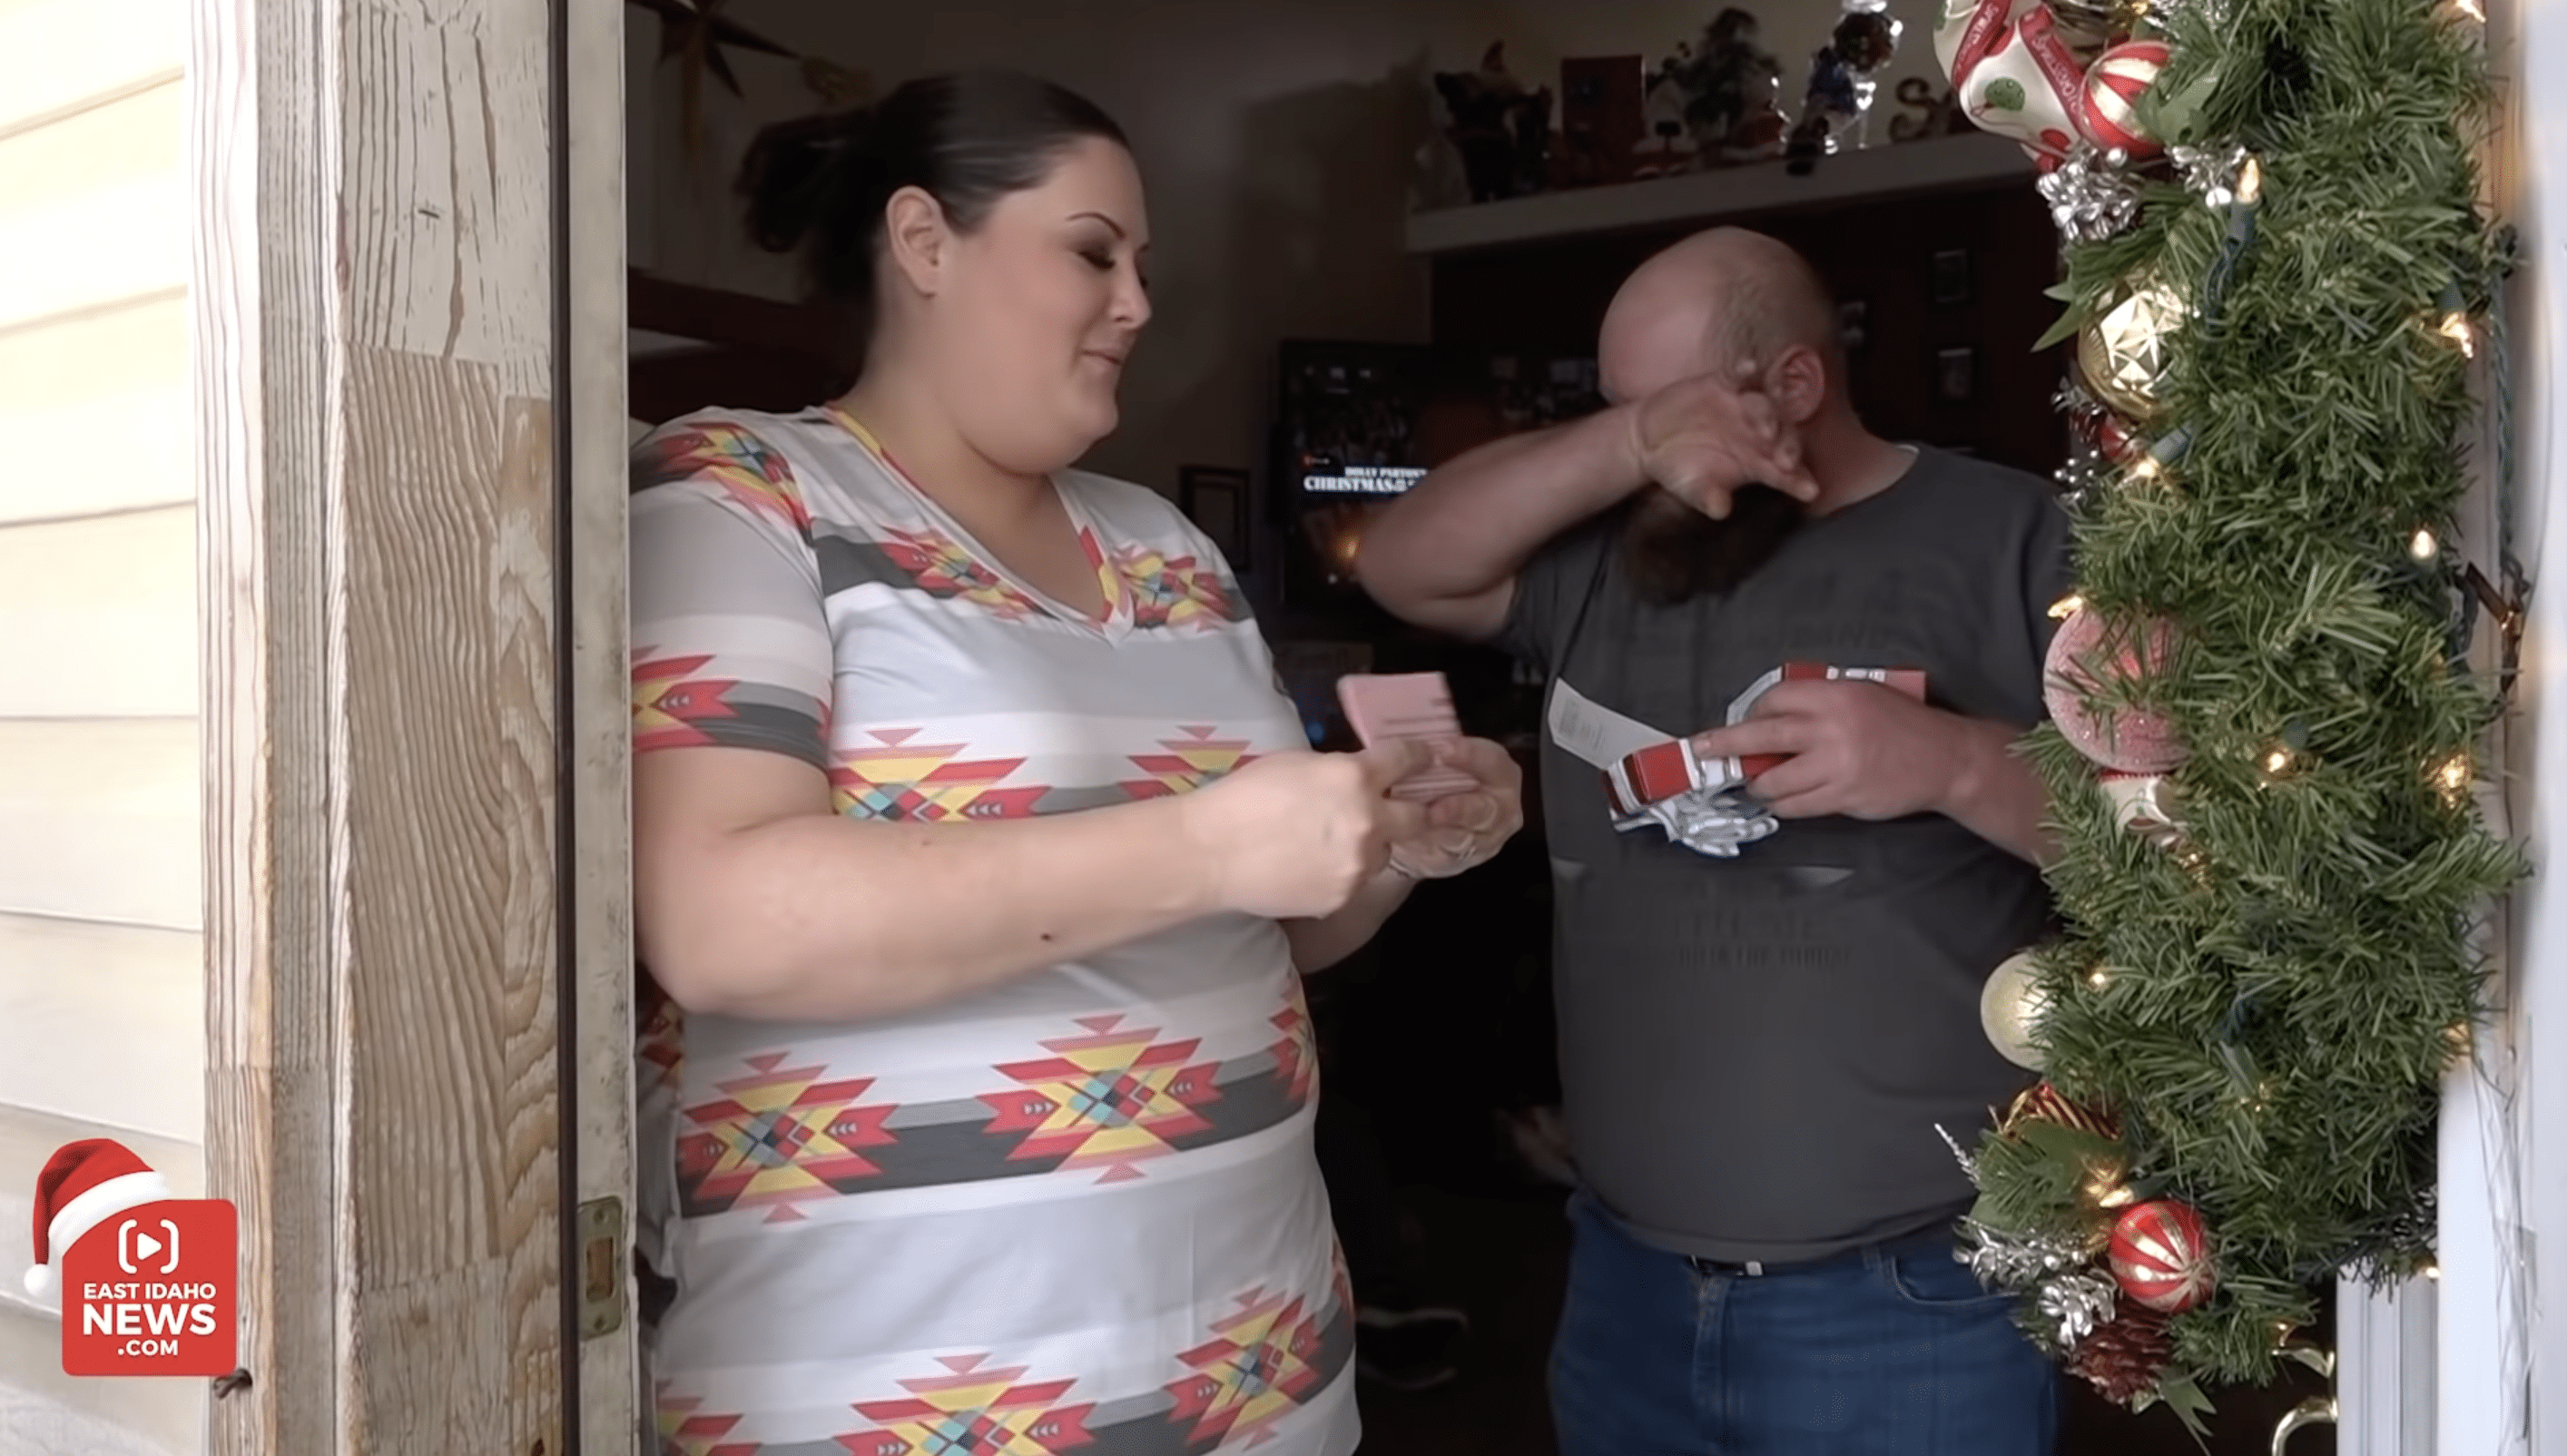 Misty and Ben became emotional after opening the box containing a $10,000 gift voucher. | Photo: YouTube.com/East Idaho News